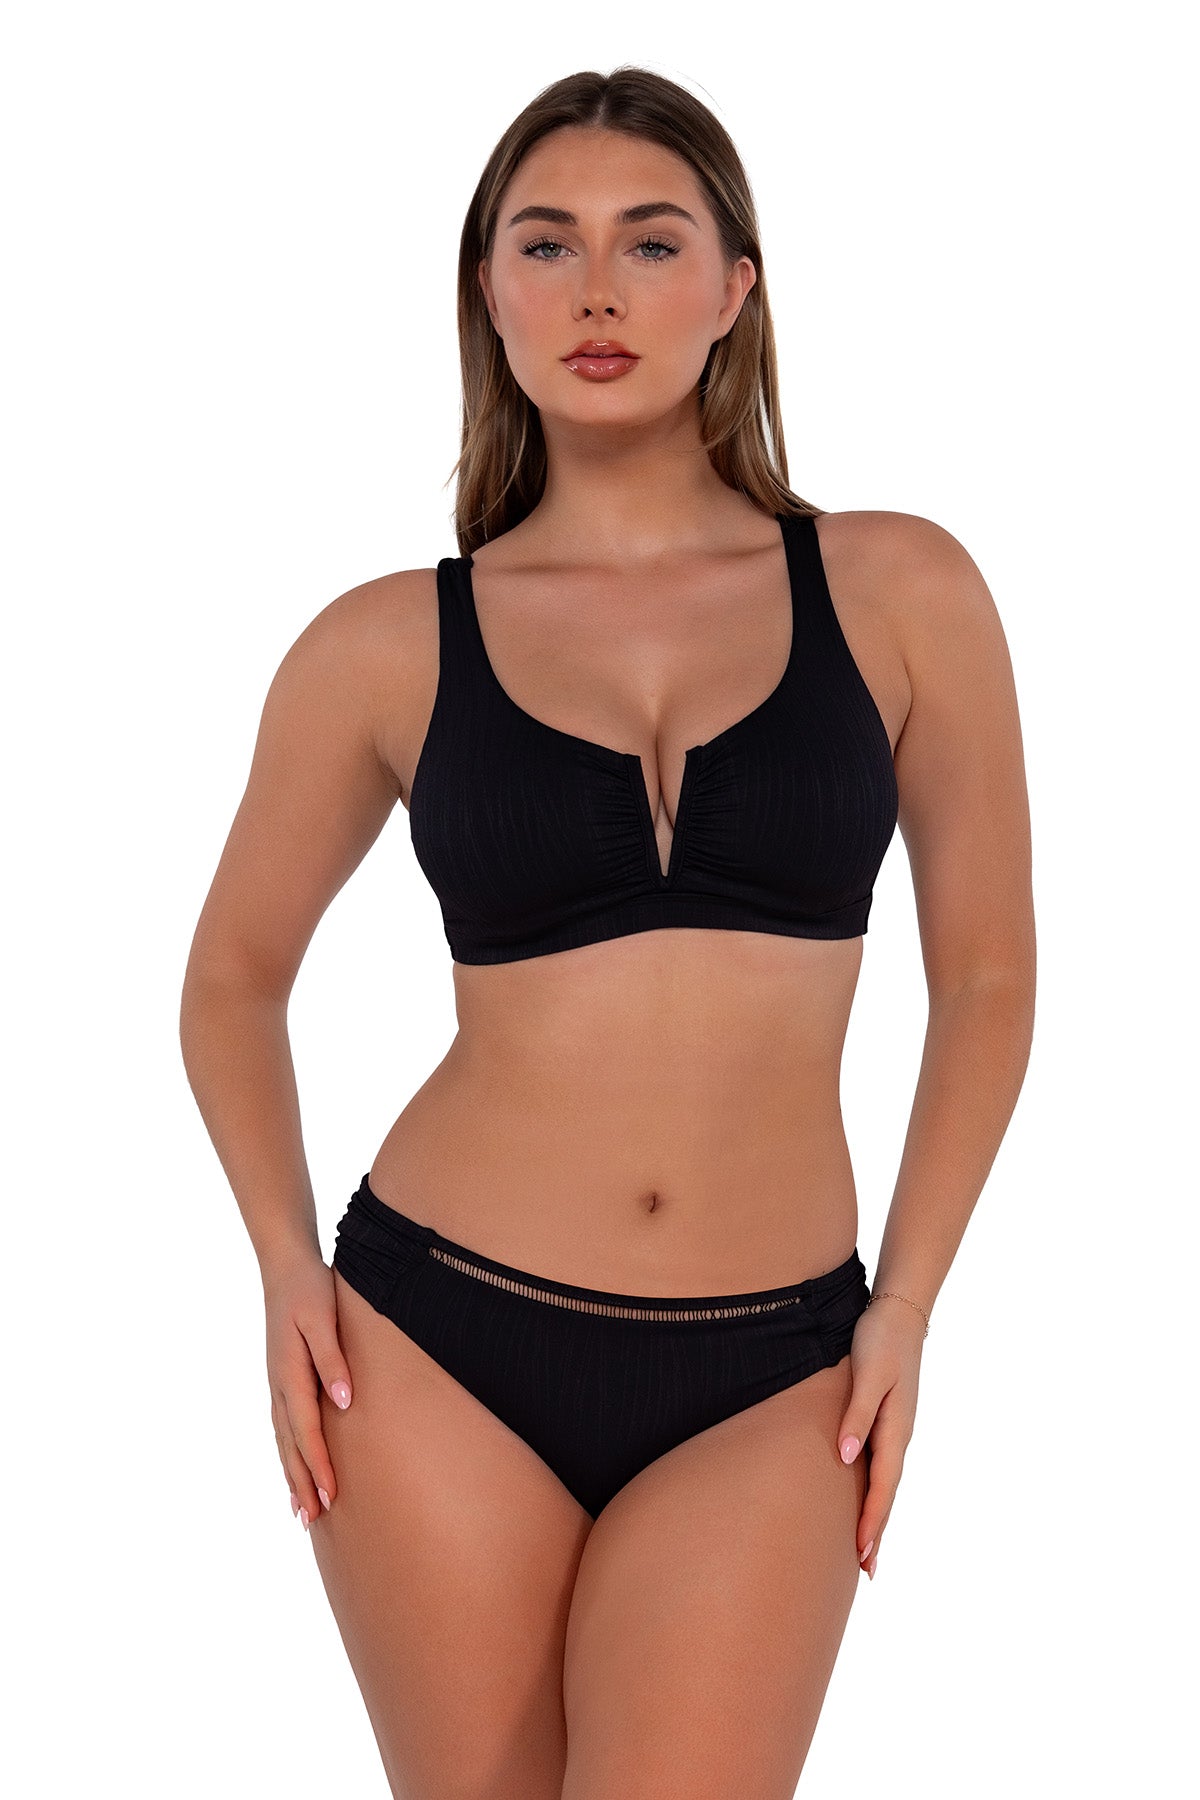 Lingerie Sets in the size 36G for Women on sale - Philippines price